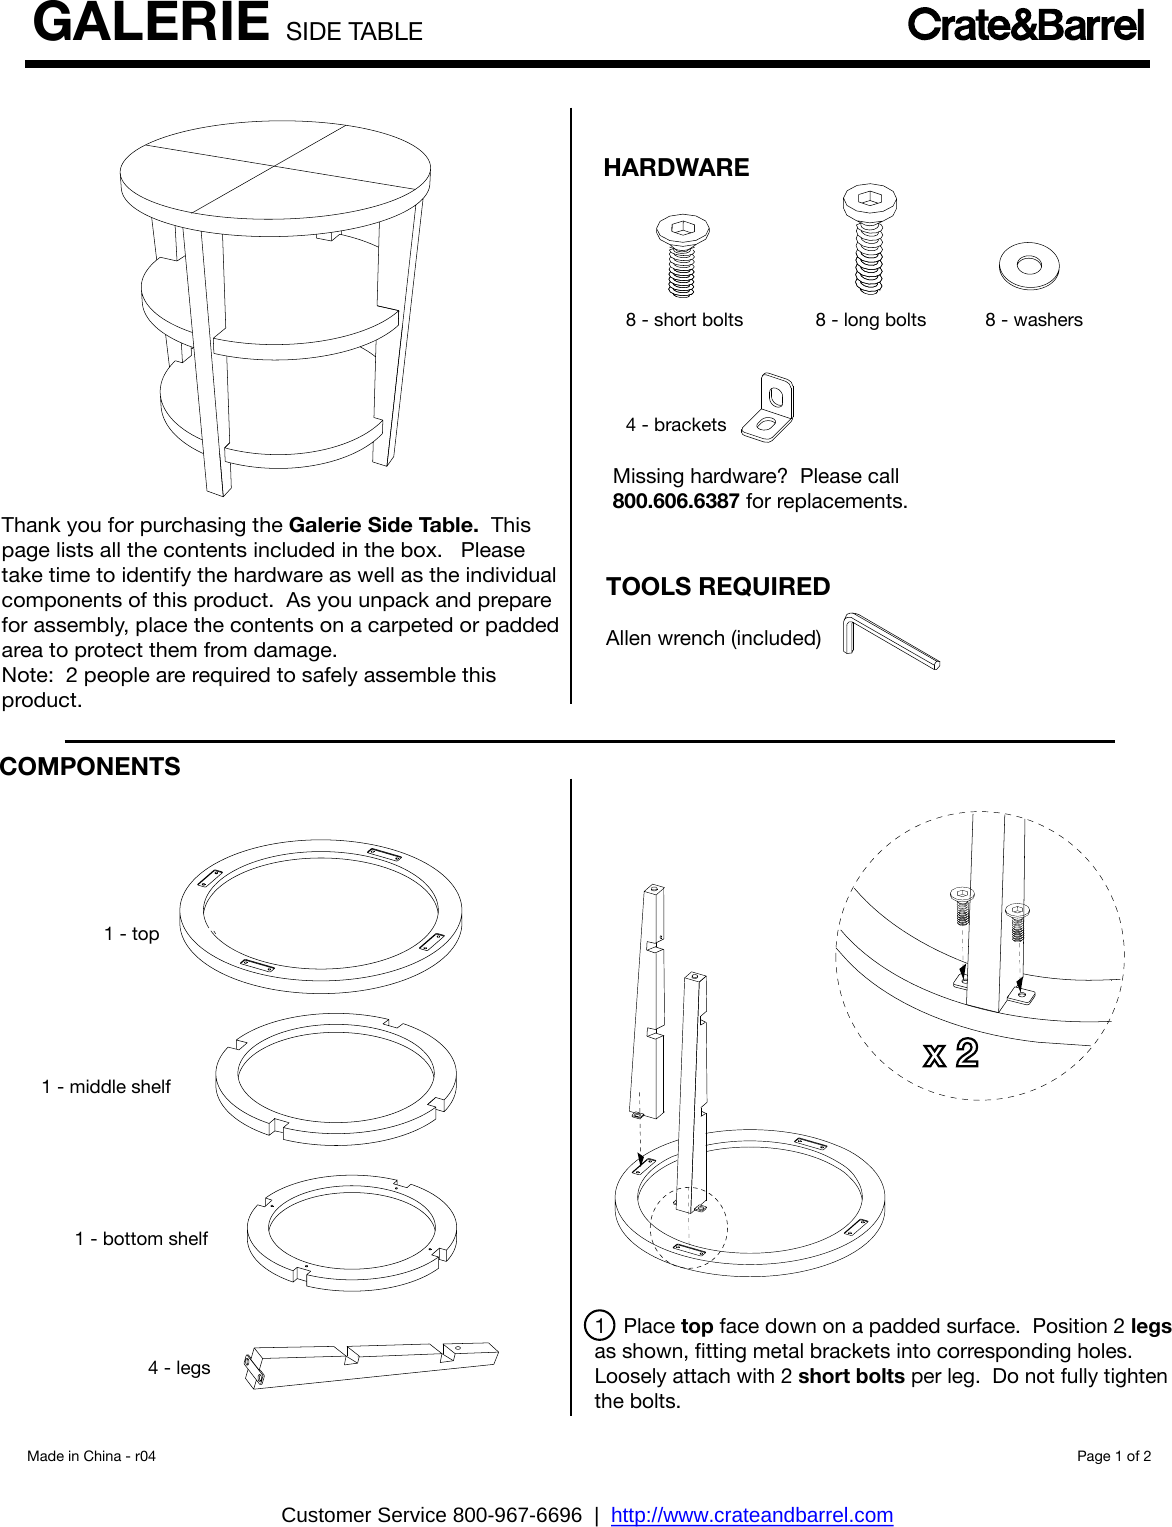 Page 1 of 2 - Crate-Barrel 487-Galerie-Side-Table Galerie Side Table Assembly Instructions From Crate And Barrel